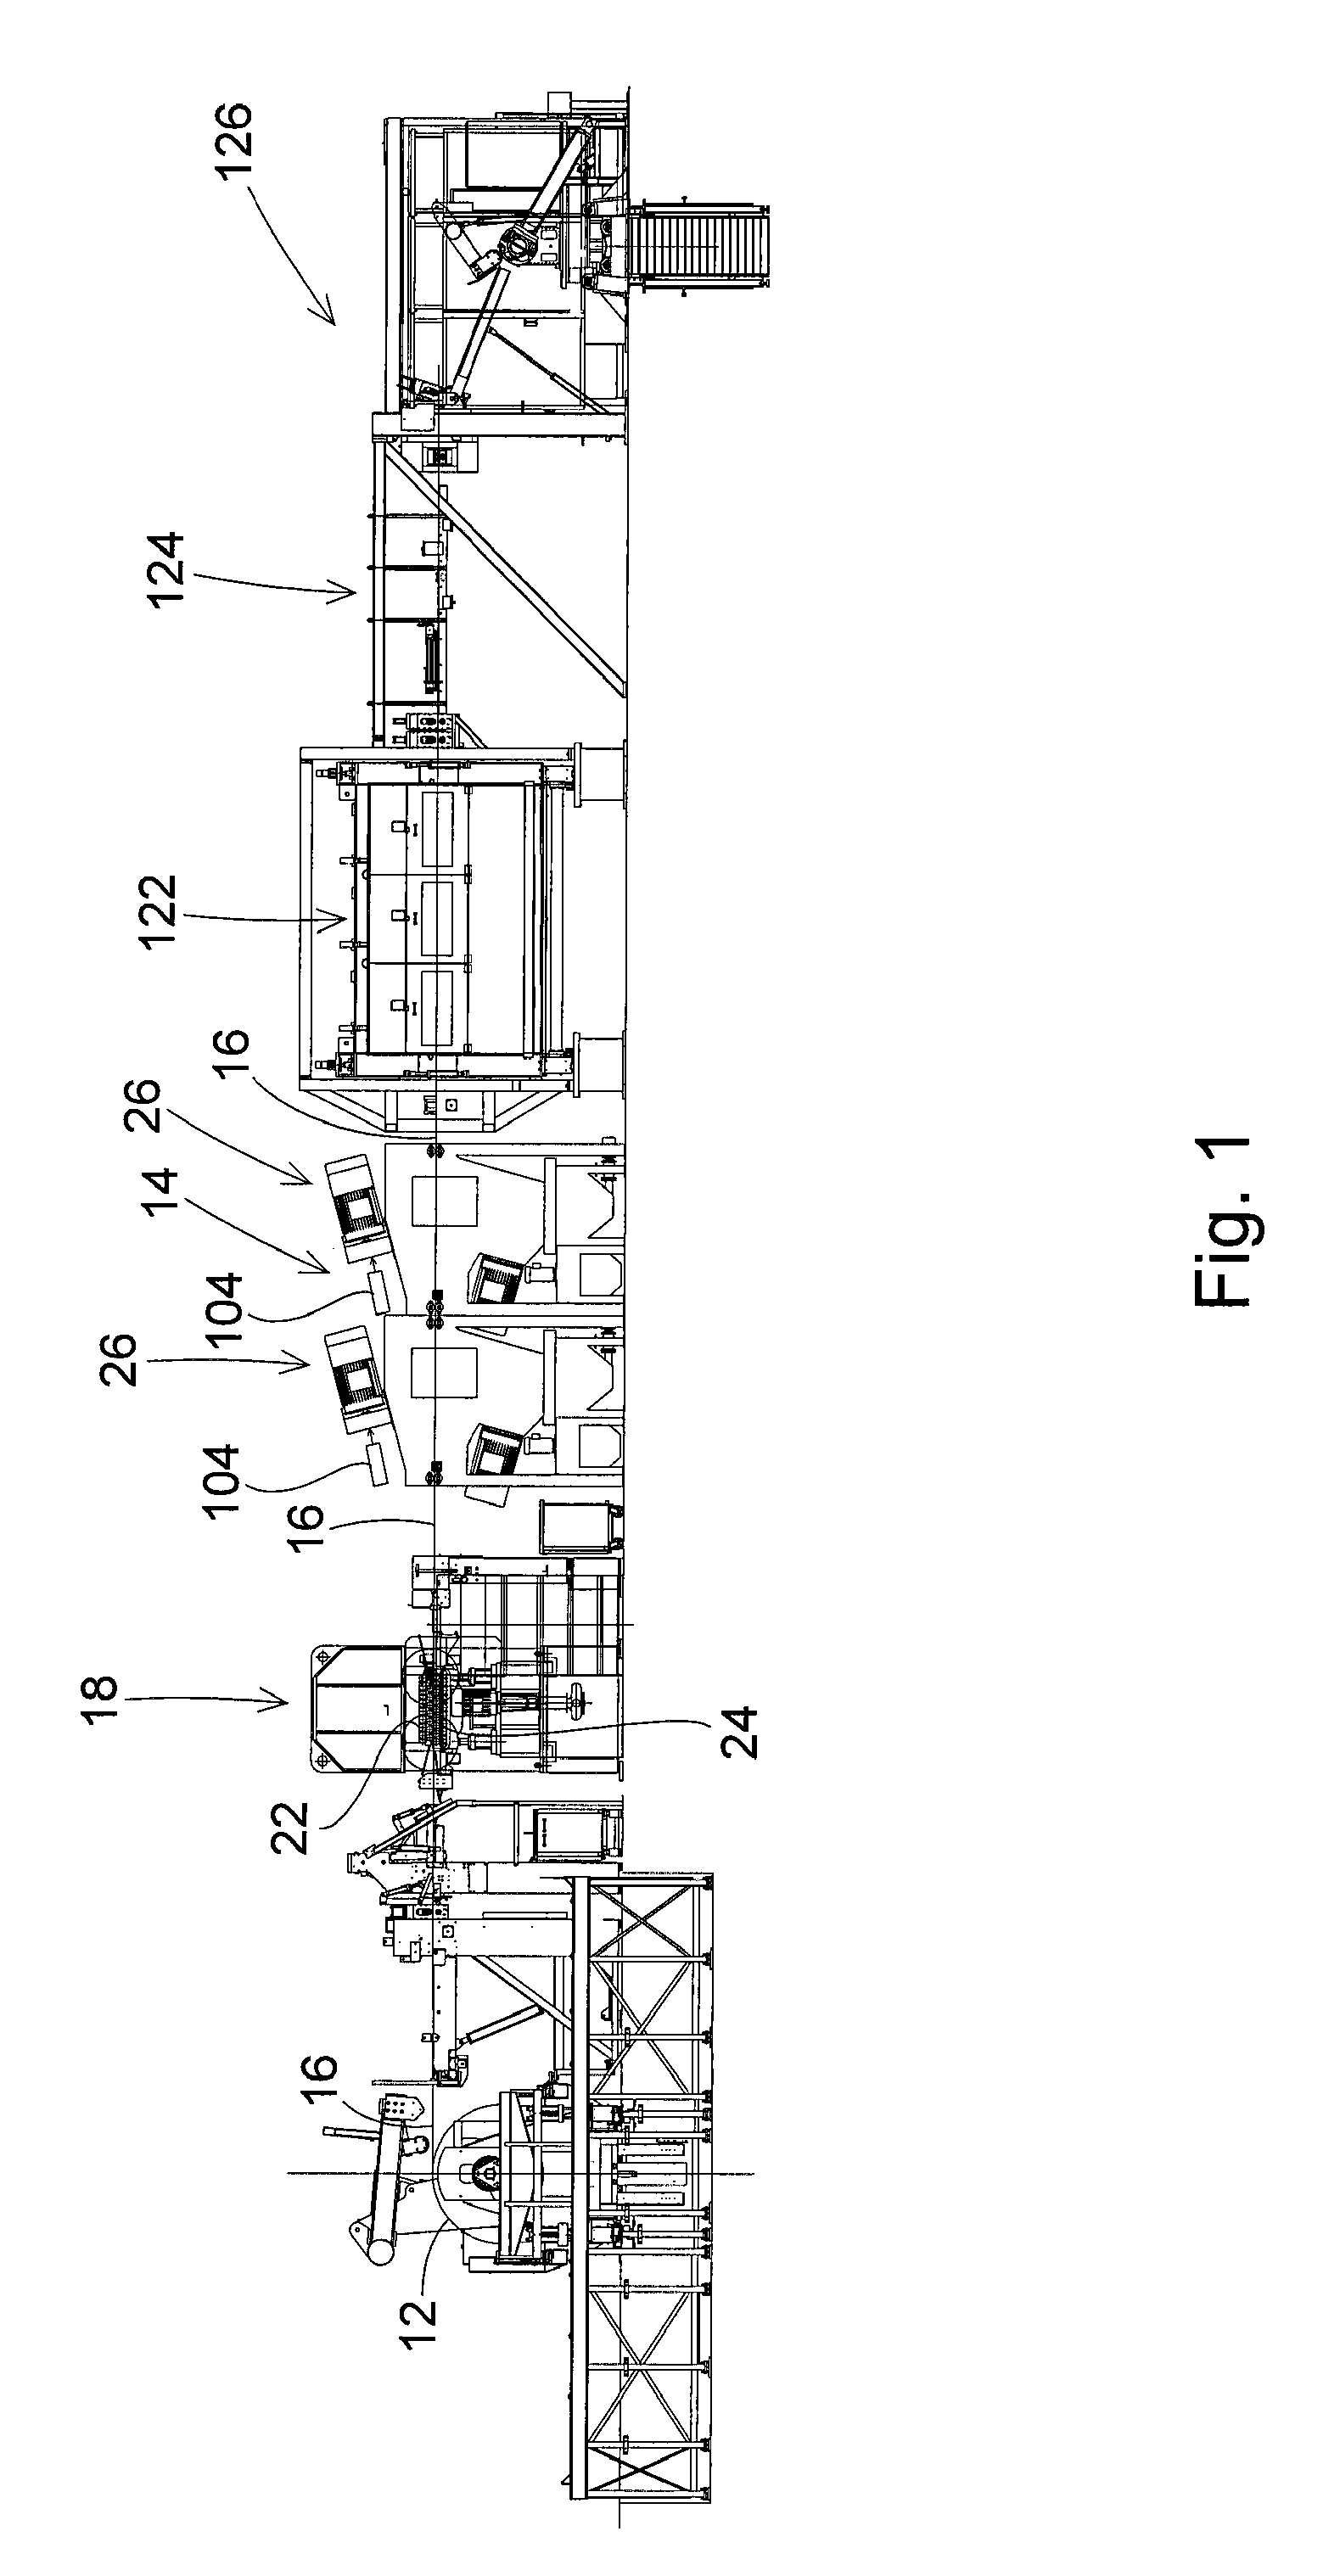 Slurry Blasting Apparatus for Removing Scale From Sheet Metal